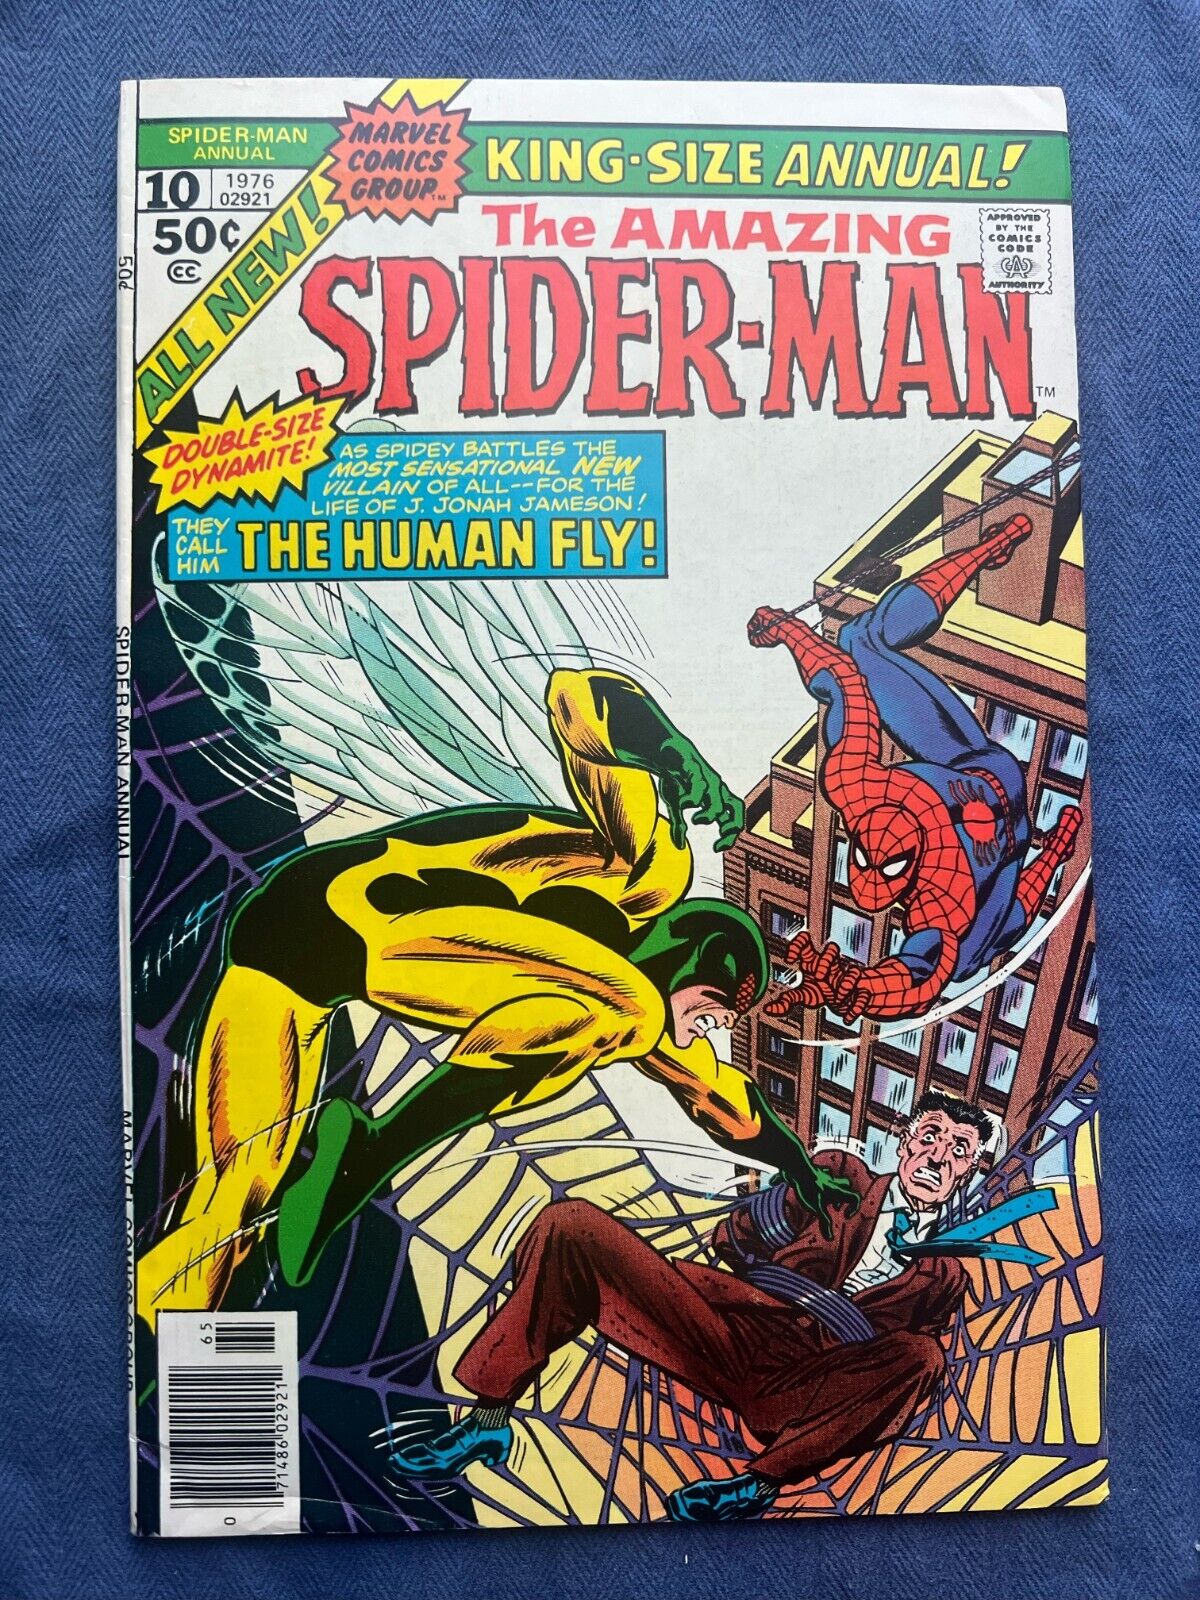 The Amazing-Spiderman- Annual #10- 1976 The Human Fly-